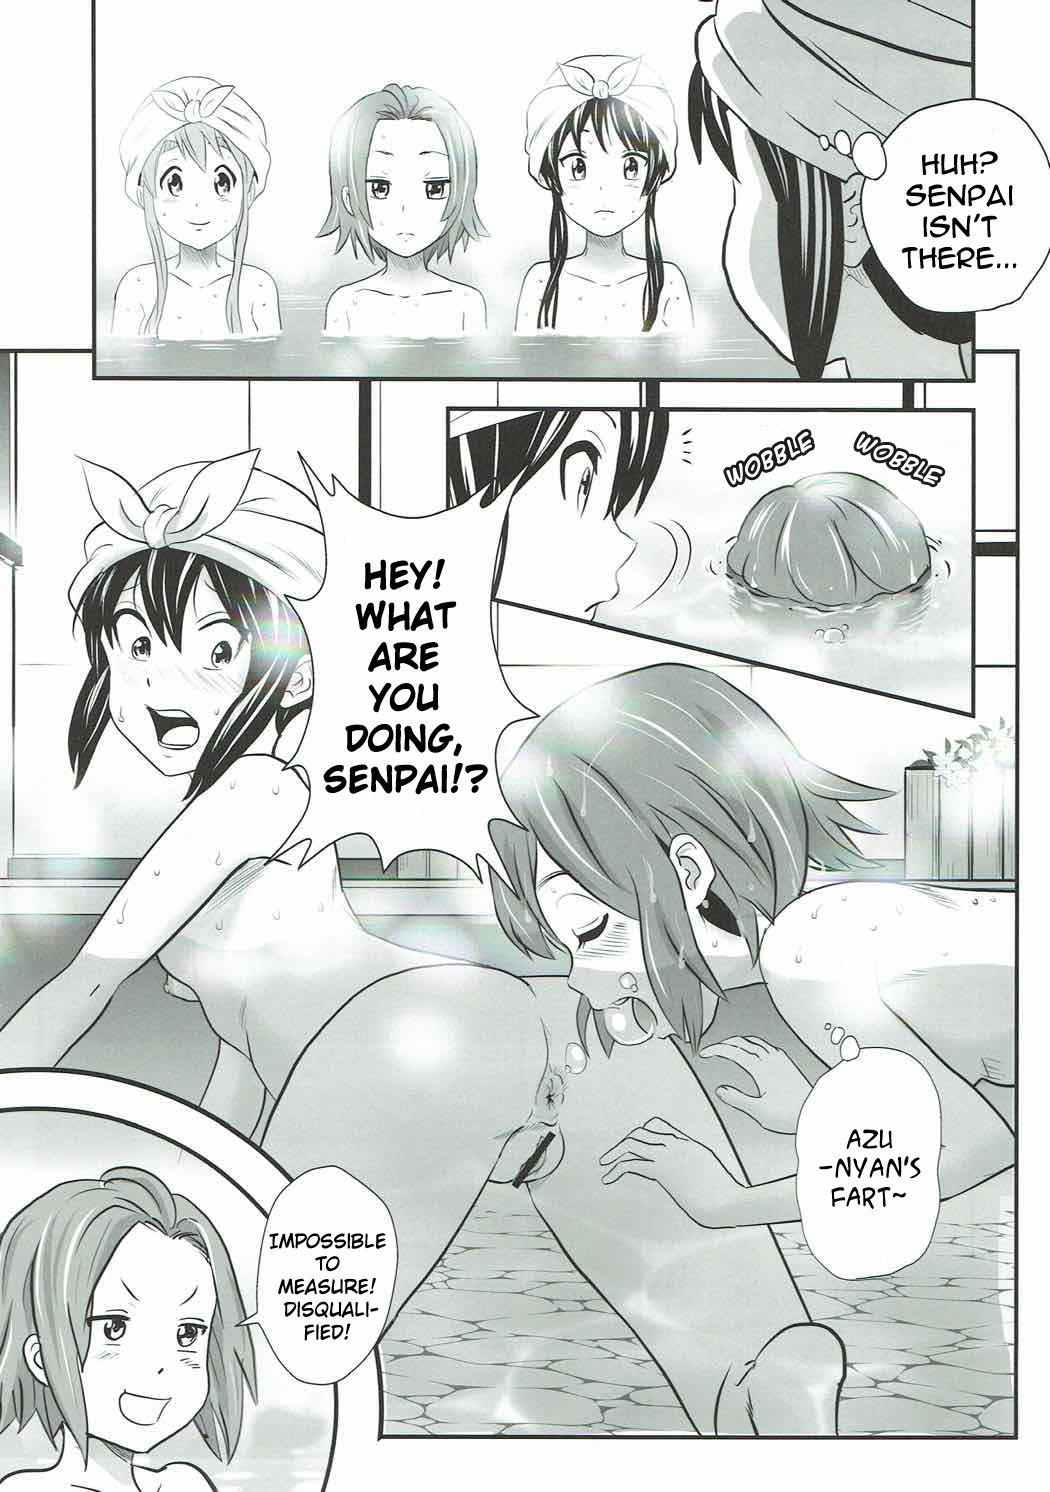 Taiwan Houkago Unchi Time Final | After School Poop Time Final - K-on Furry - Page 8